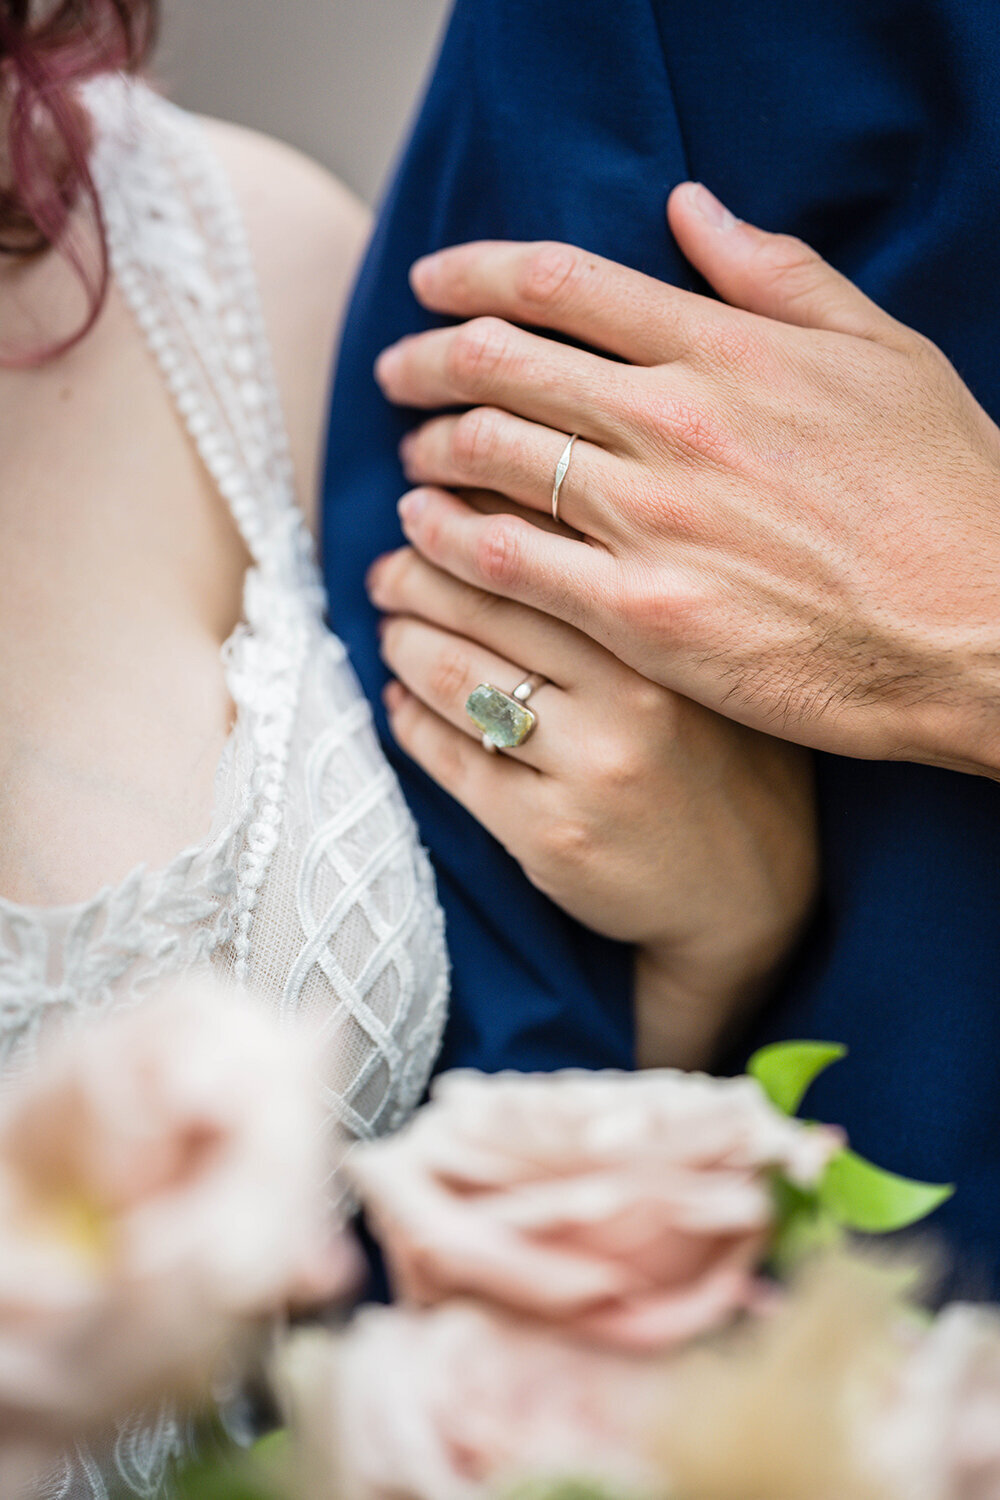 A close-up shot of a bride’s hand wrapping around her partner’s bicep as the groom places his hand gently on top of hers.